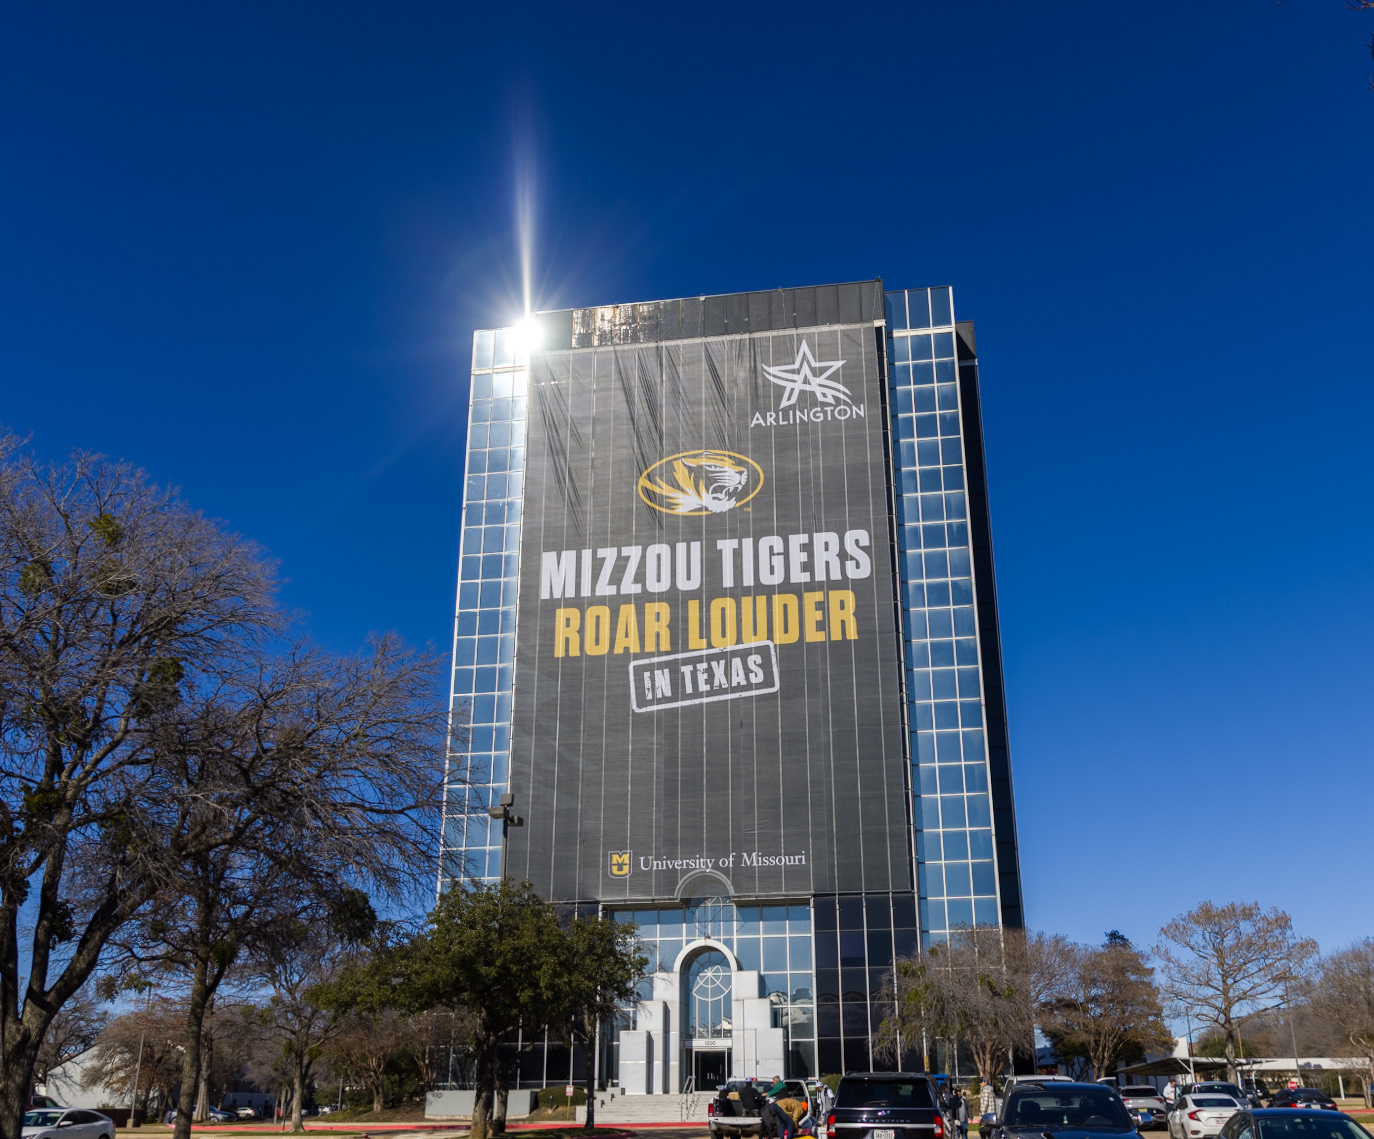 Large wrap around Copeland Building in Arlington, Texas, that says Mizzou Tigers Roar Louder in Texas.